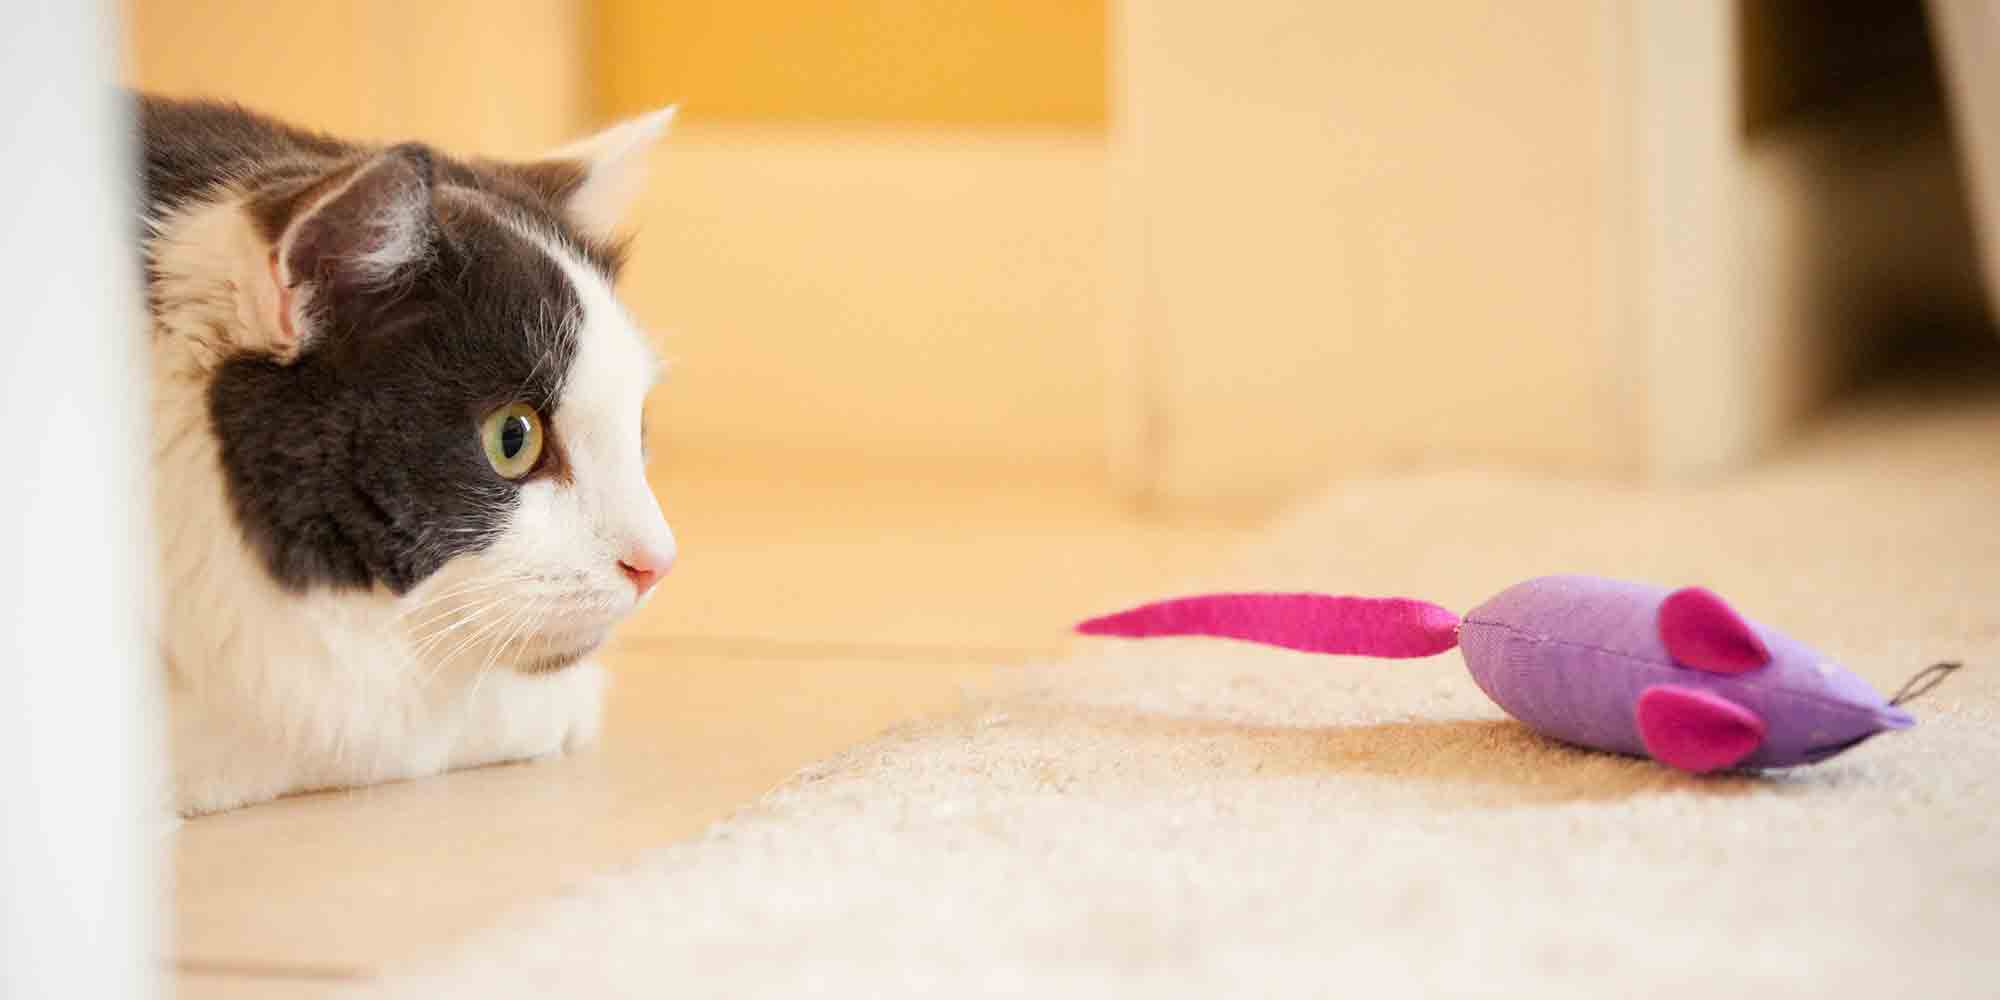 Cat and mouse toy